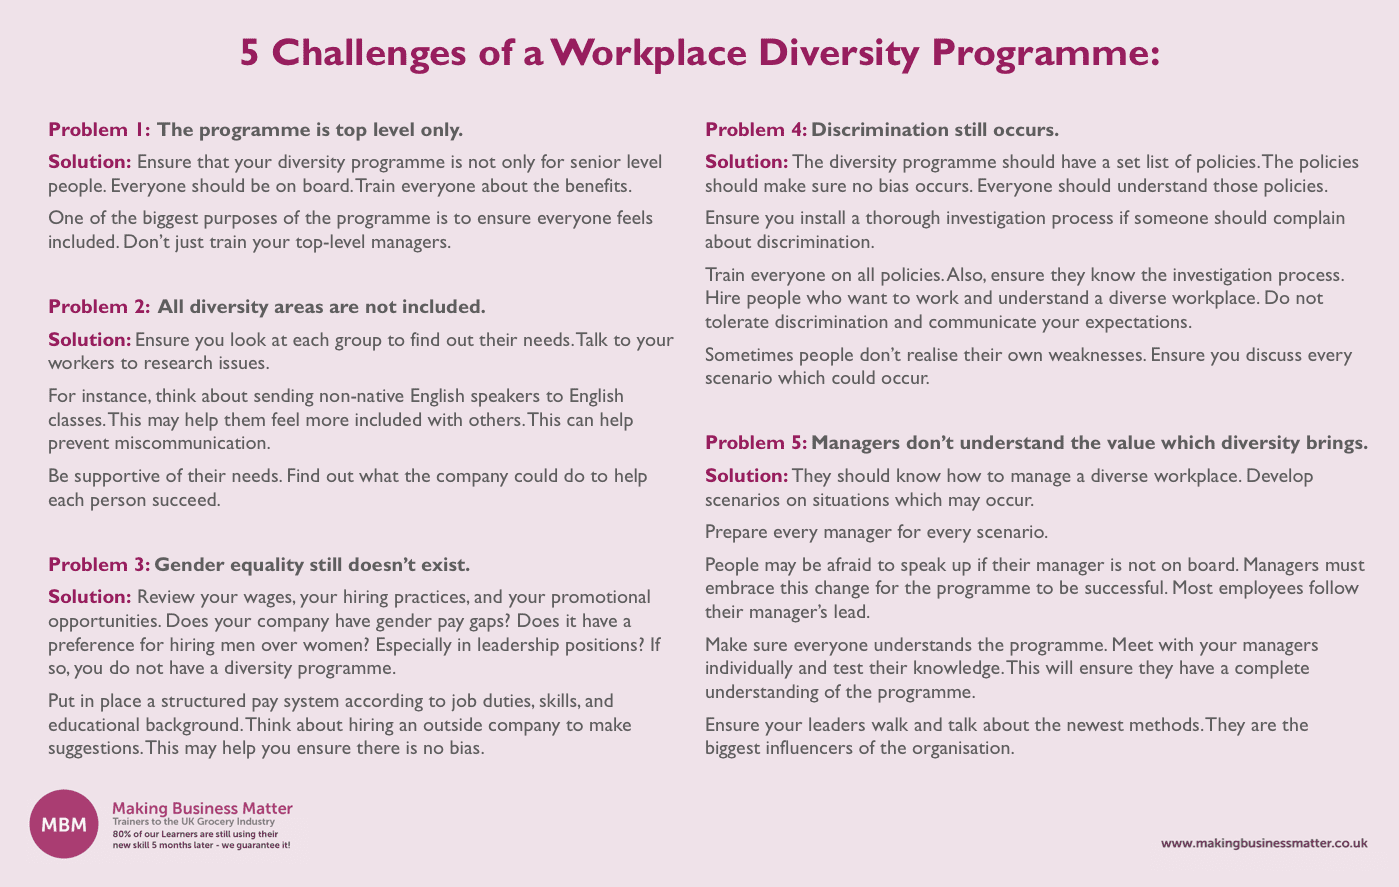 MBM poster titles 5 challenges of a workplace diversity programme